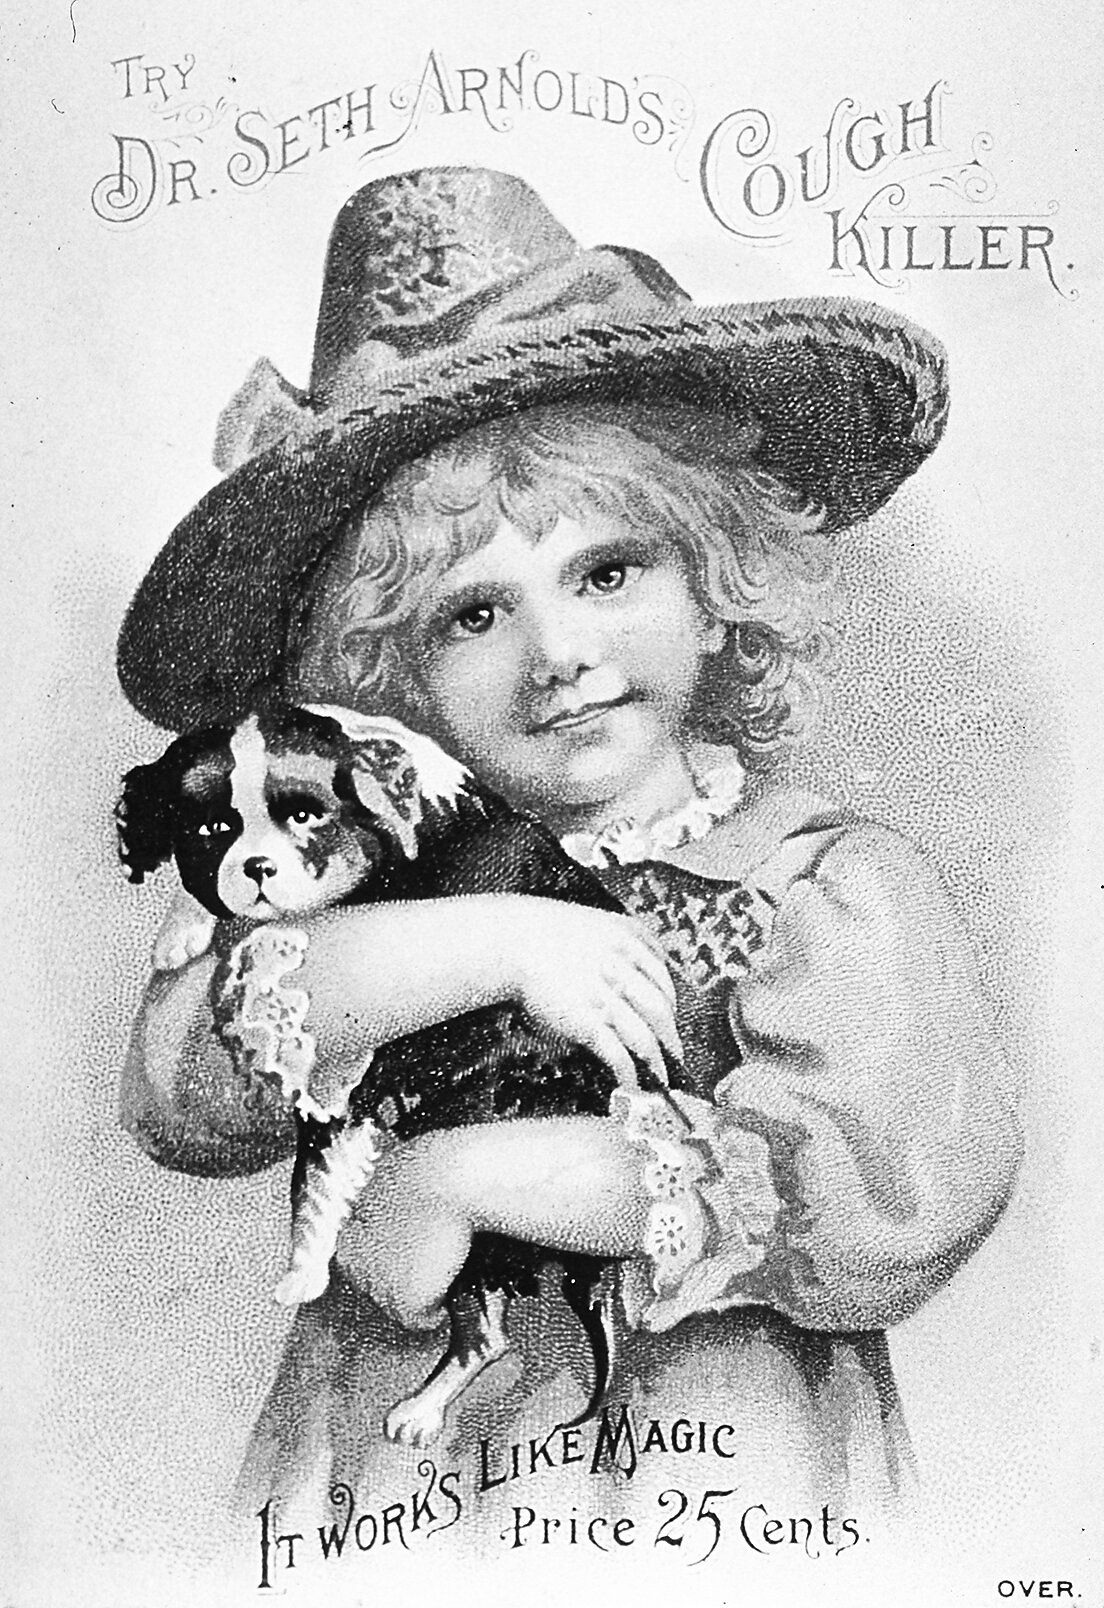 Advertisement for Dr. Seth Arnold's Cough Killer, which contained morphine, featuring a smiling little girl holding a small dog.